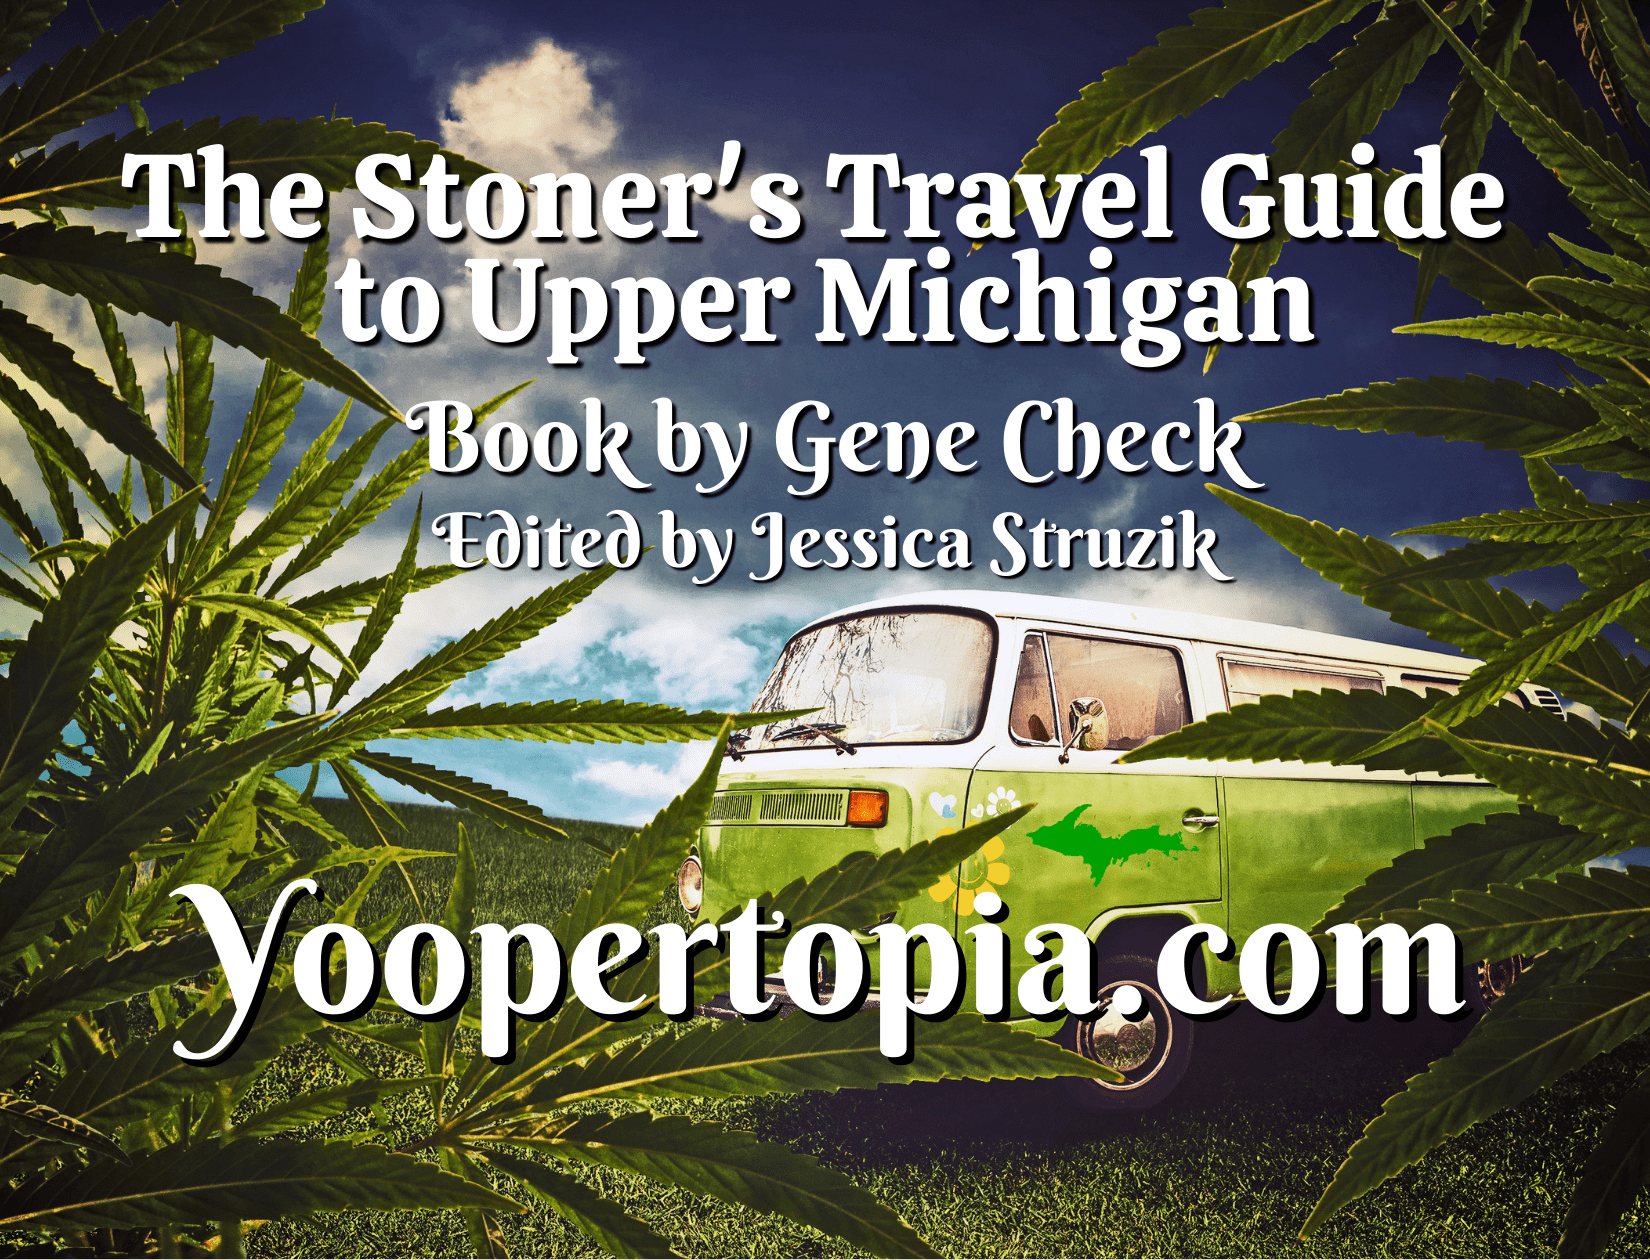 The Stoner’s Travel Guide to Upper Michigan by Gene Check